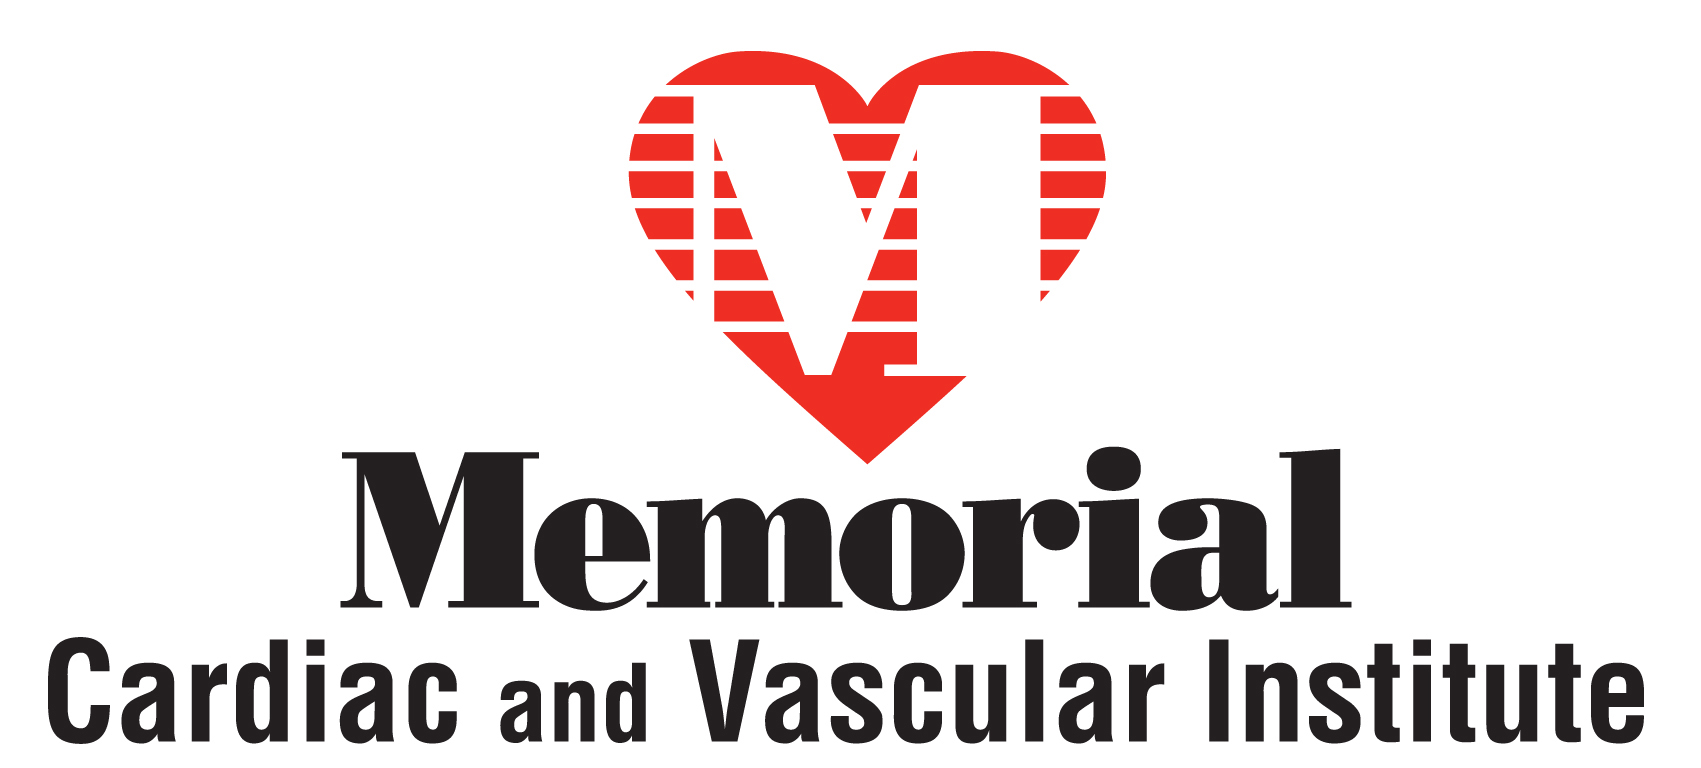 Memorial Cardiac and Vascular Institute is a cardiovascular care leader, offering a wide array of services dedicated to the prevention, detection, and treatment of cardiovascular disease